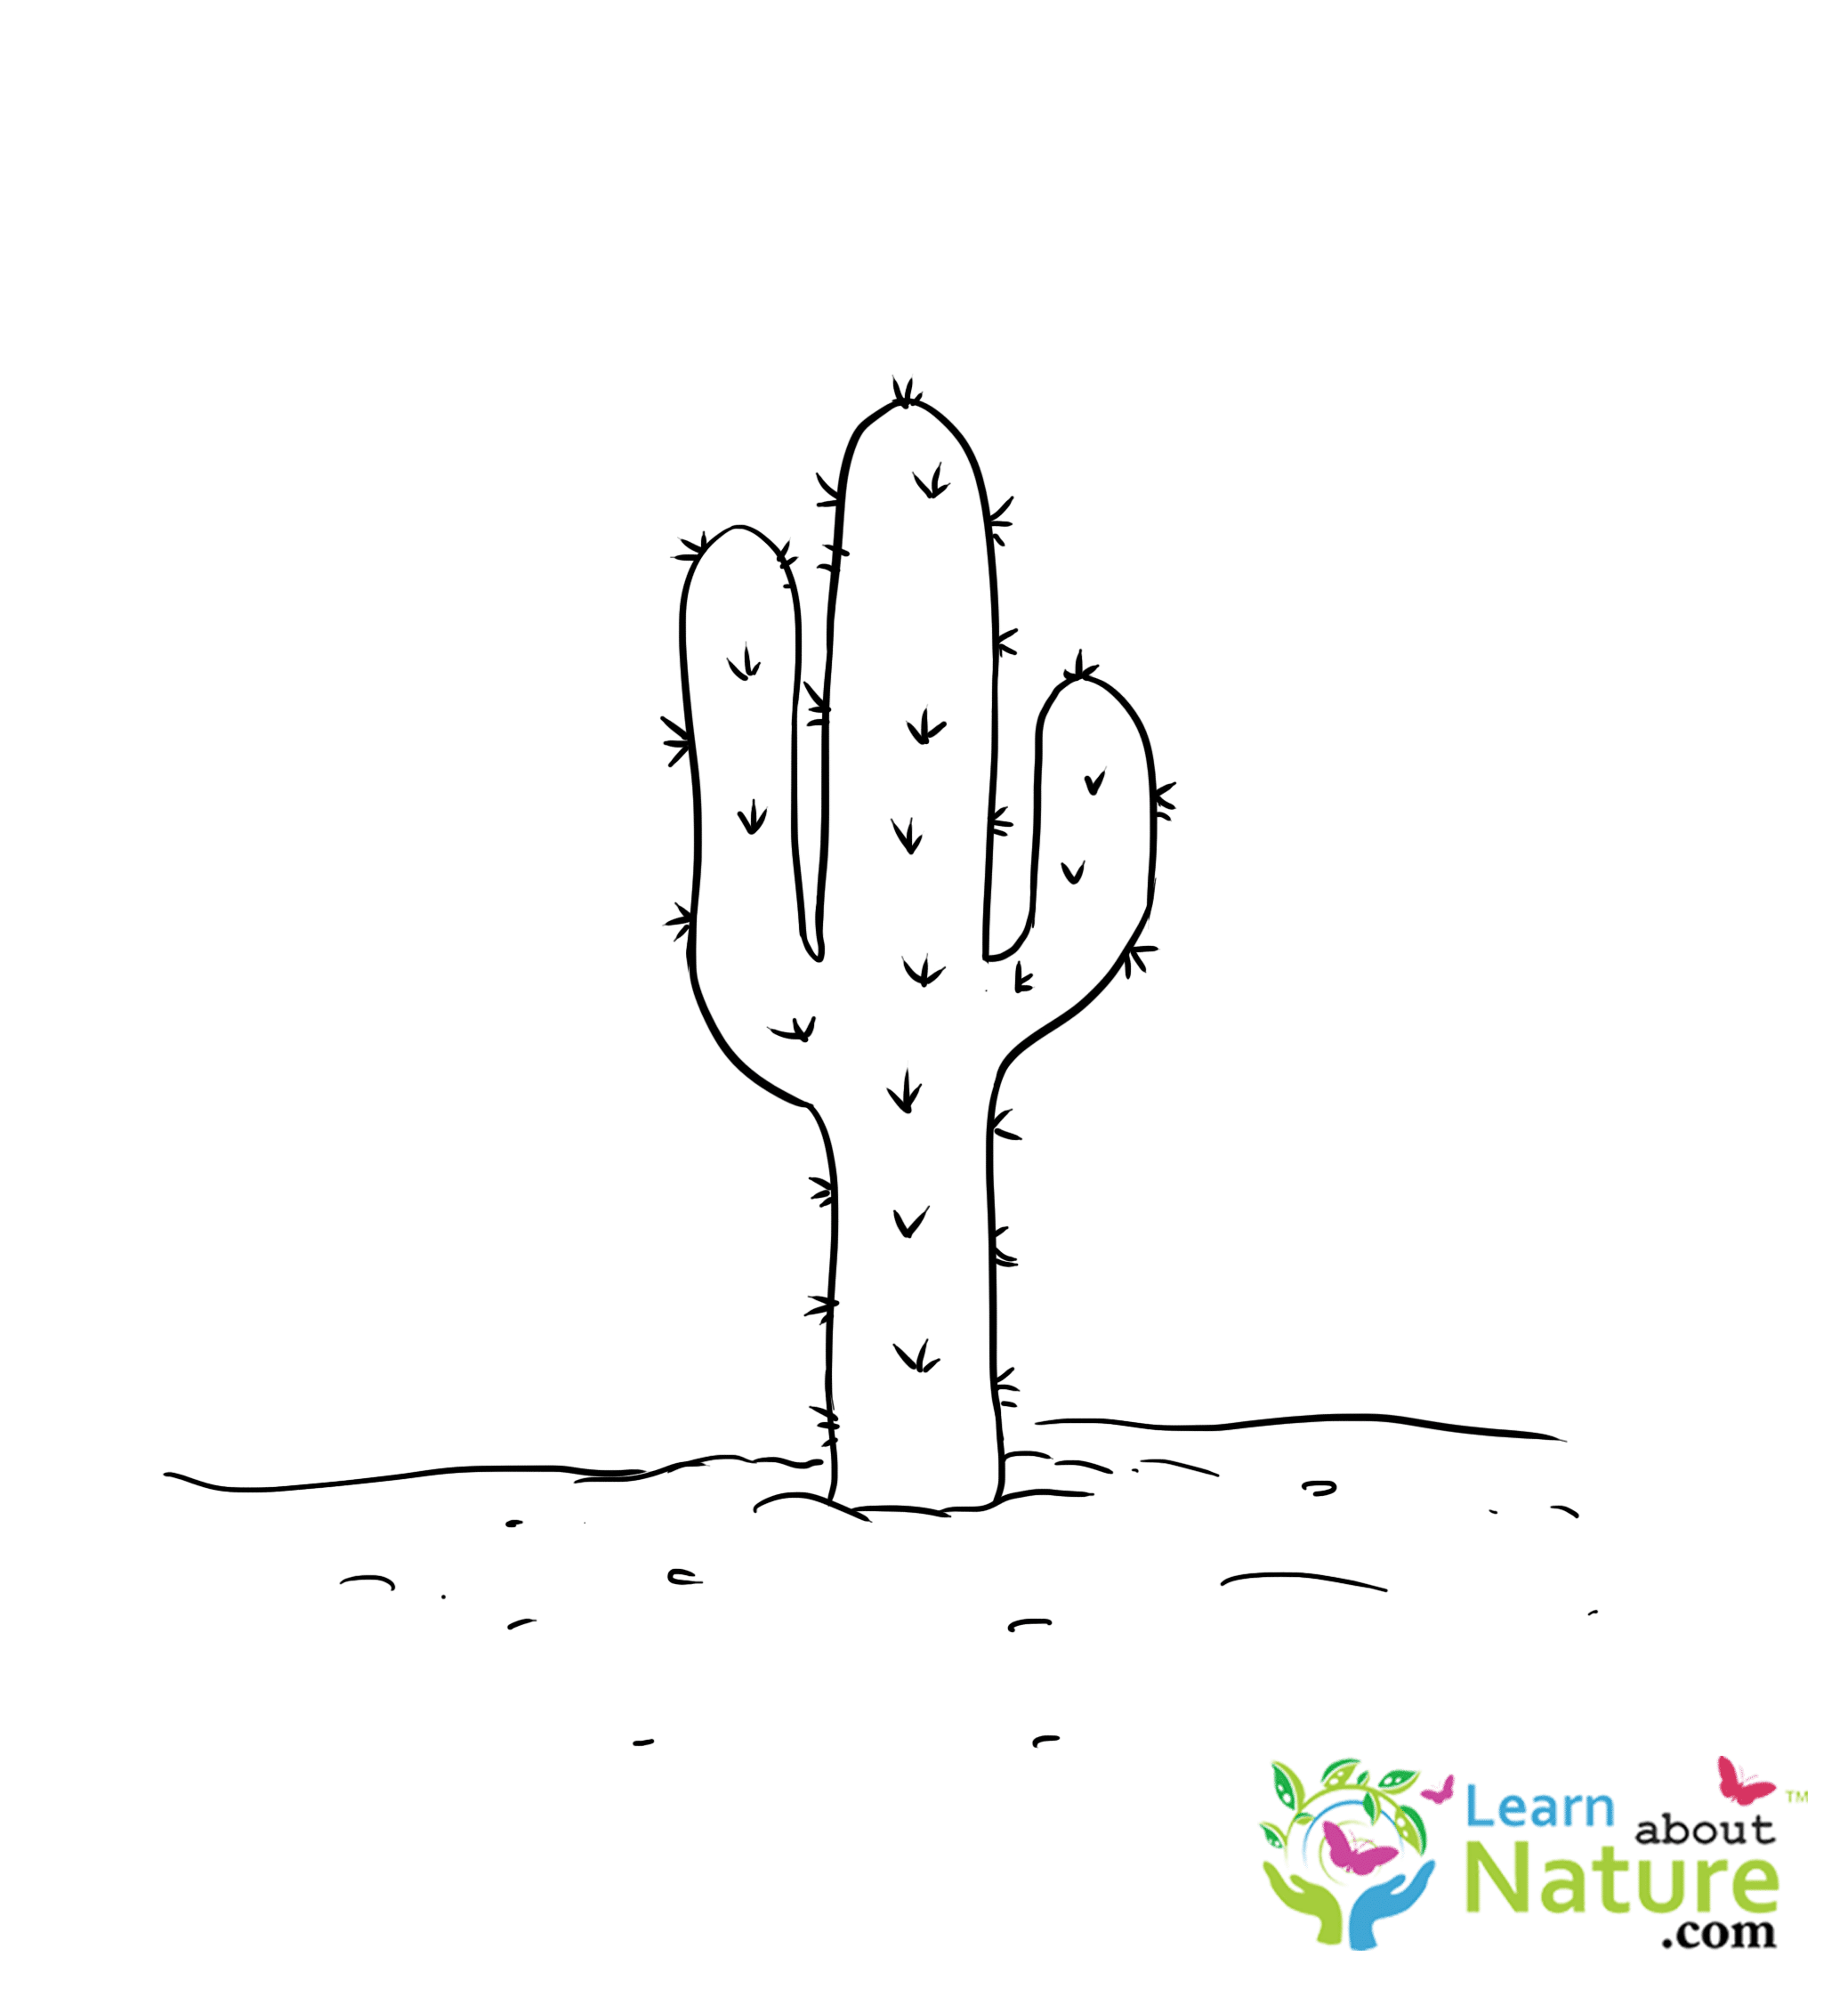 Cactus Coloring Page   Learn About Nature